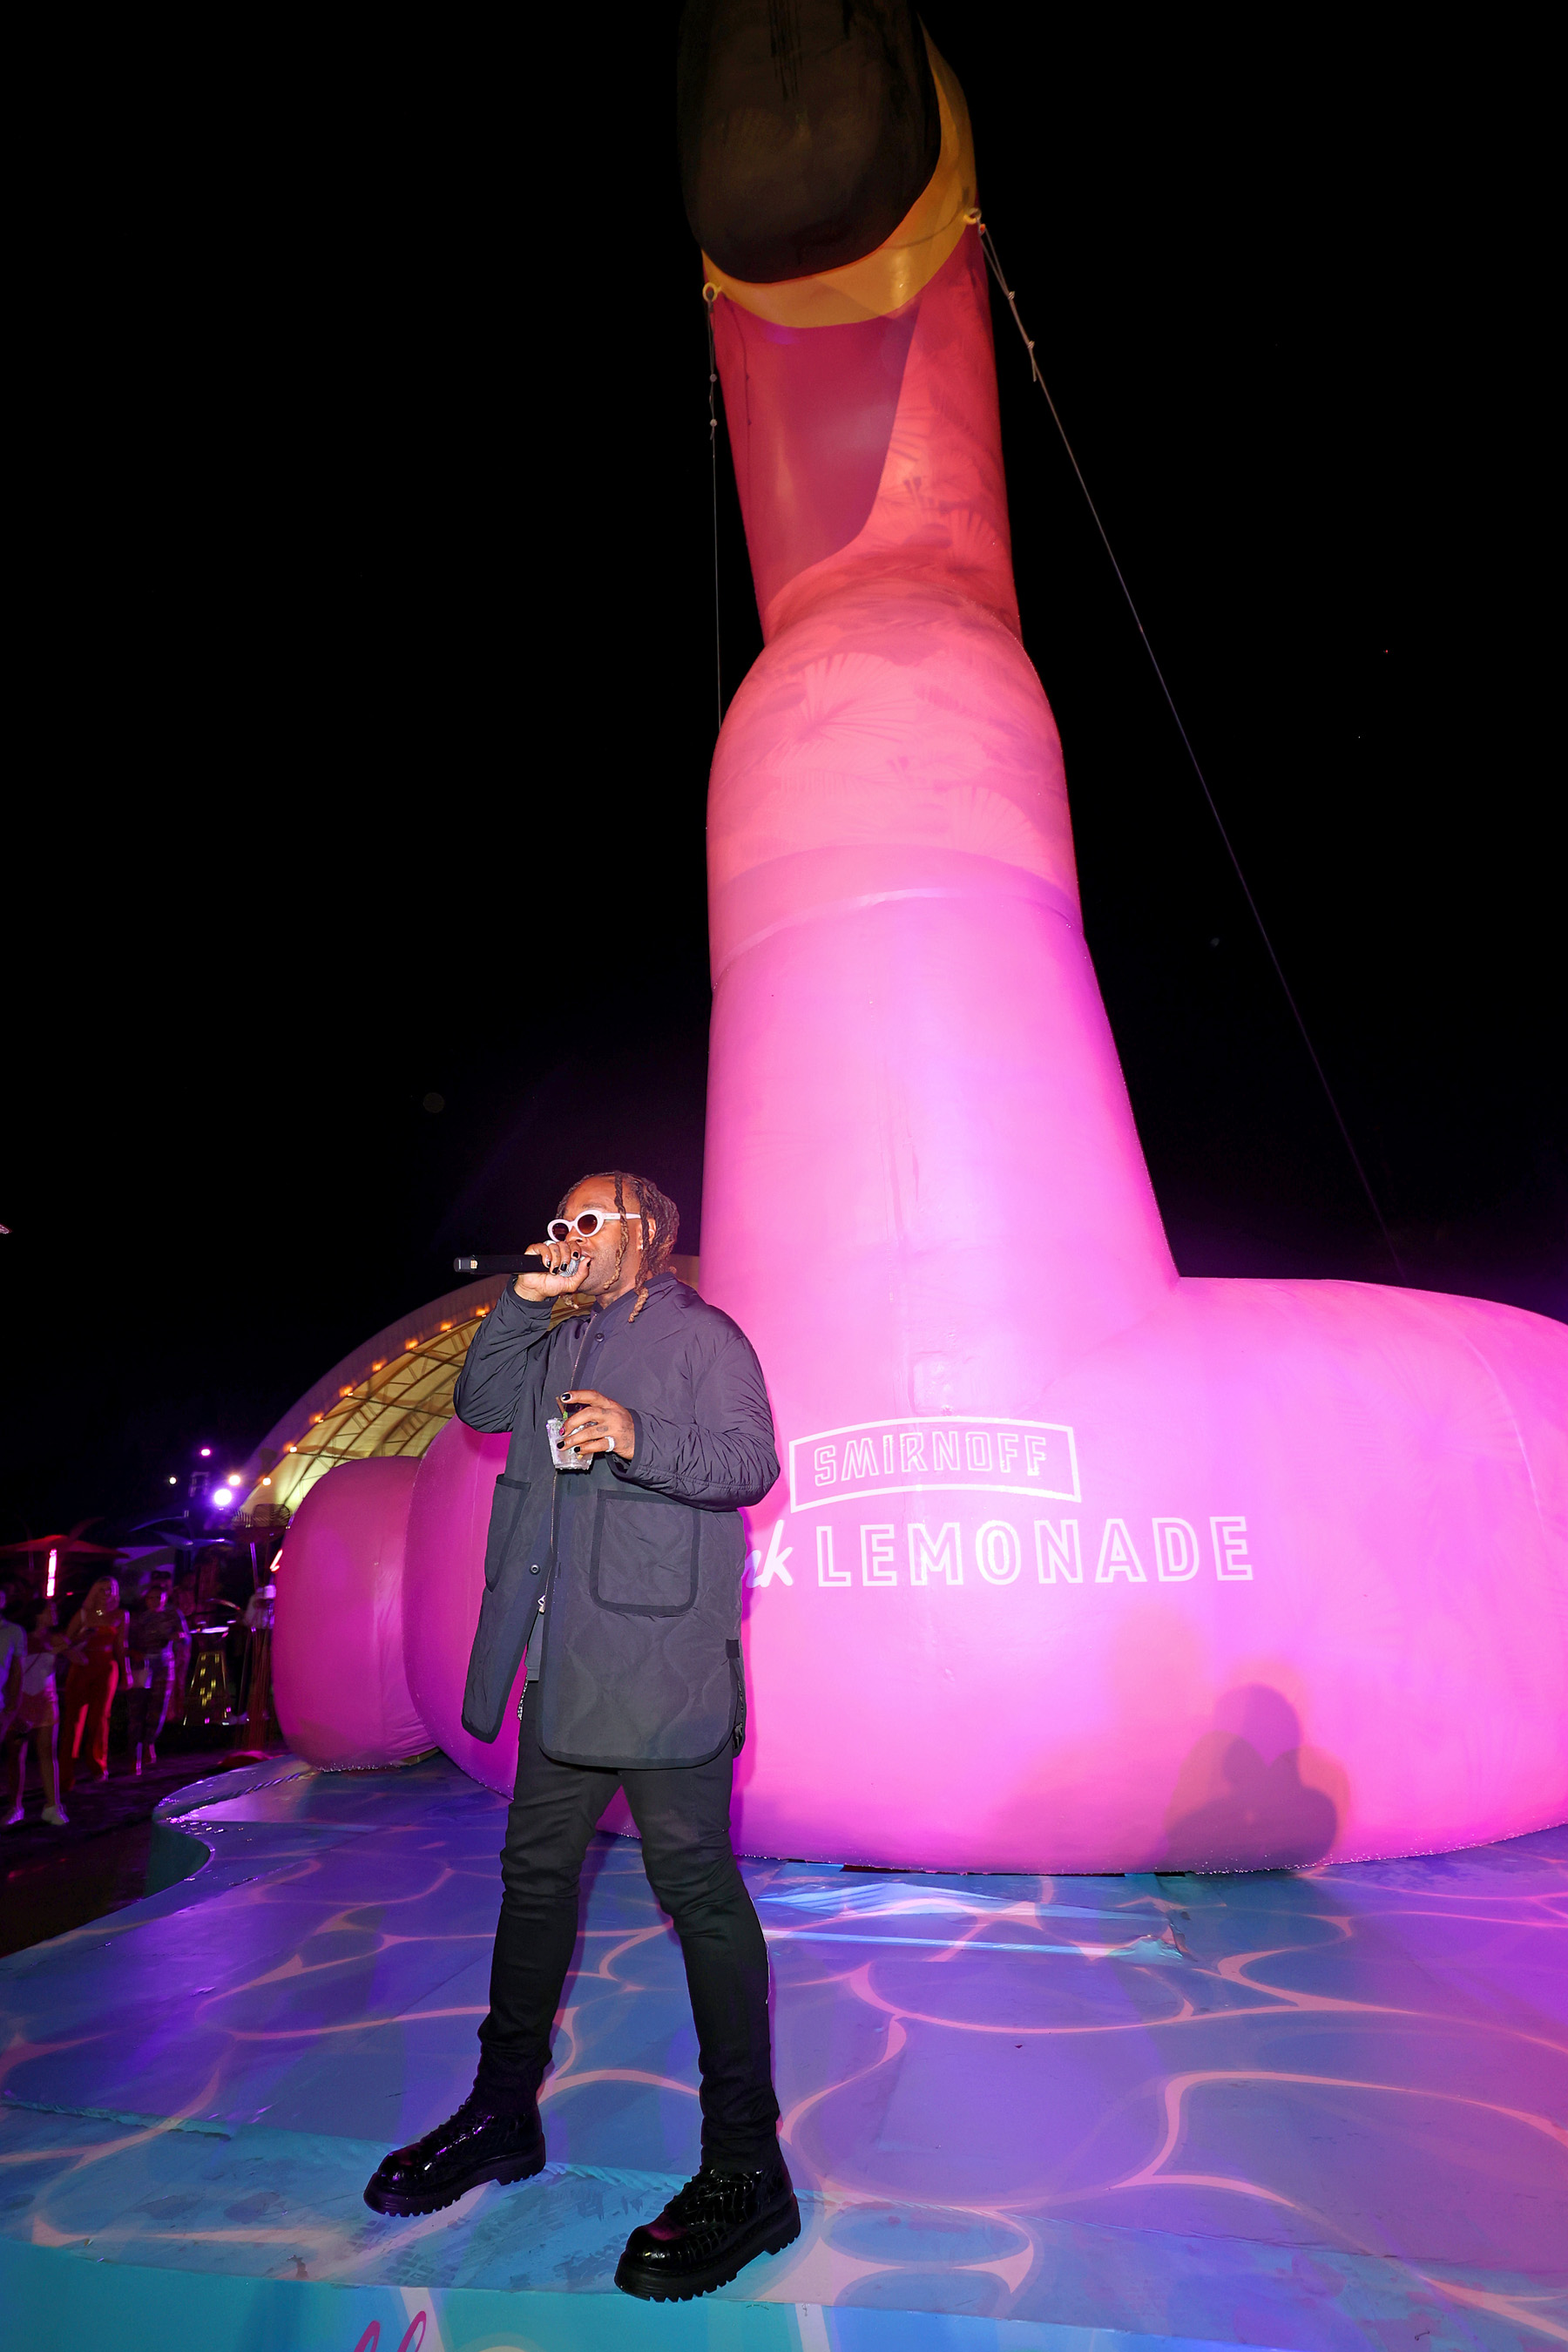 Smirnoff Paints Miami Pink with the Help of Music Superstar Ty Dolla $ign, a Larger-Than-Life Pink Flamingo and Pop-Up Neon Lemonade Stand Serving Its Newest Pink Lemonade Offering